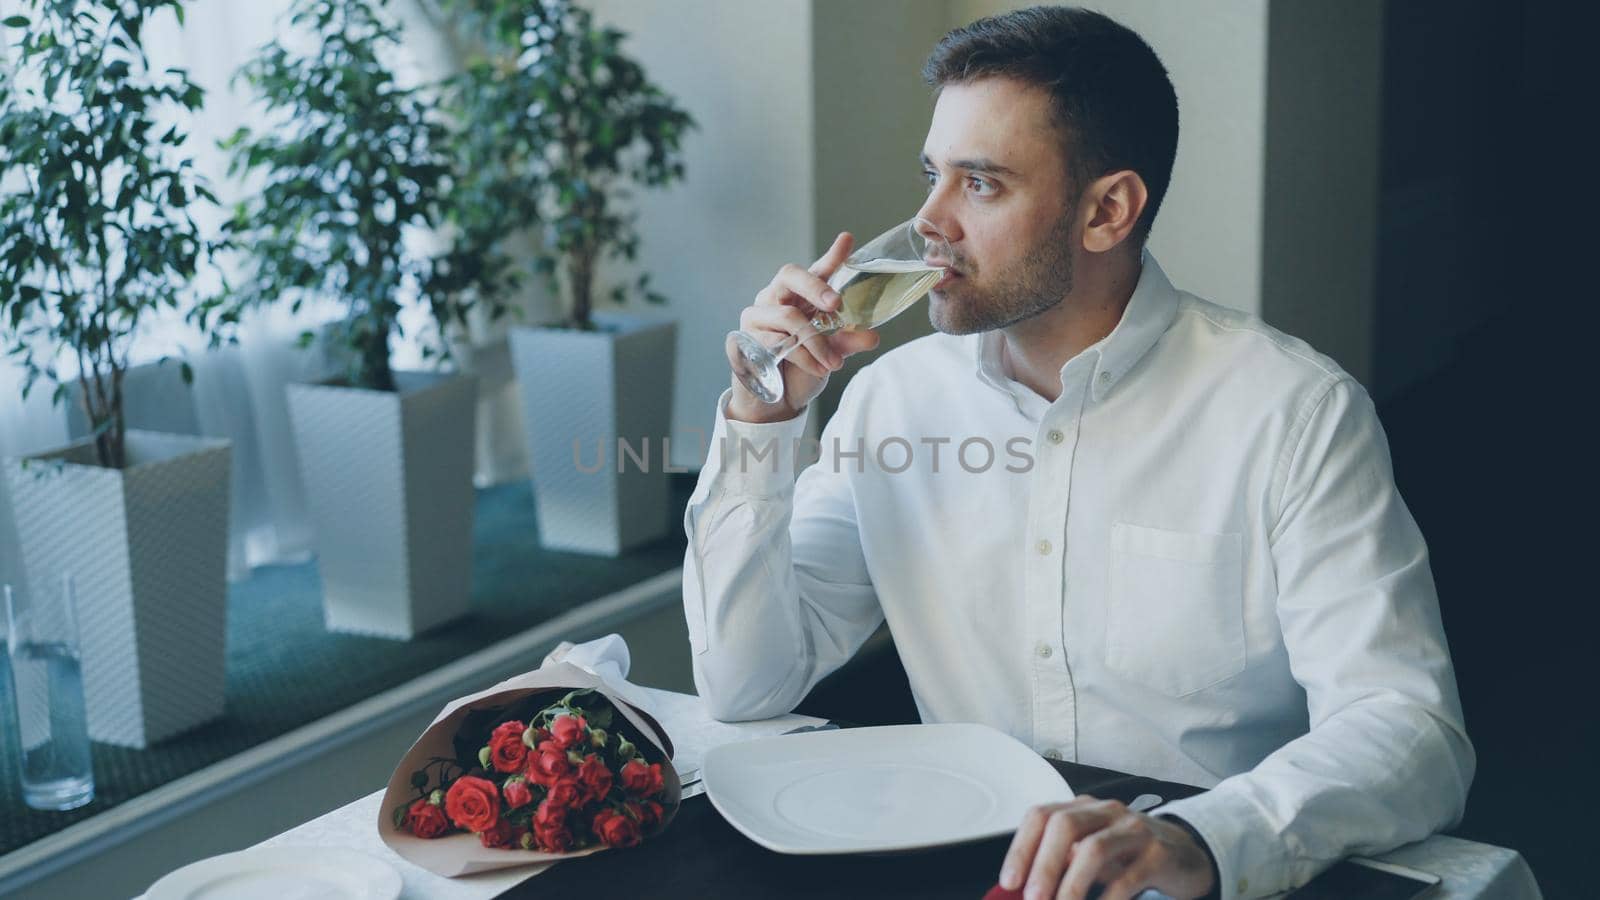 Nervous handsome man is sitting alone at table in restaurant, drinking champagne and waiting for his girlfriend, then leaving. Bunch of red roses, jewelry box and smartphone are visible.